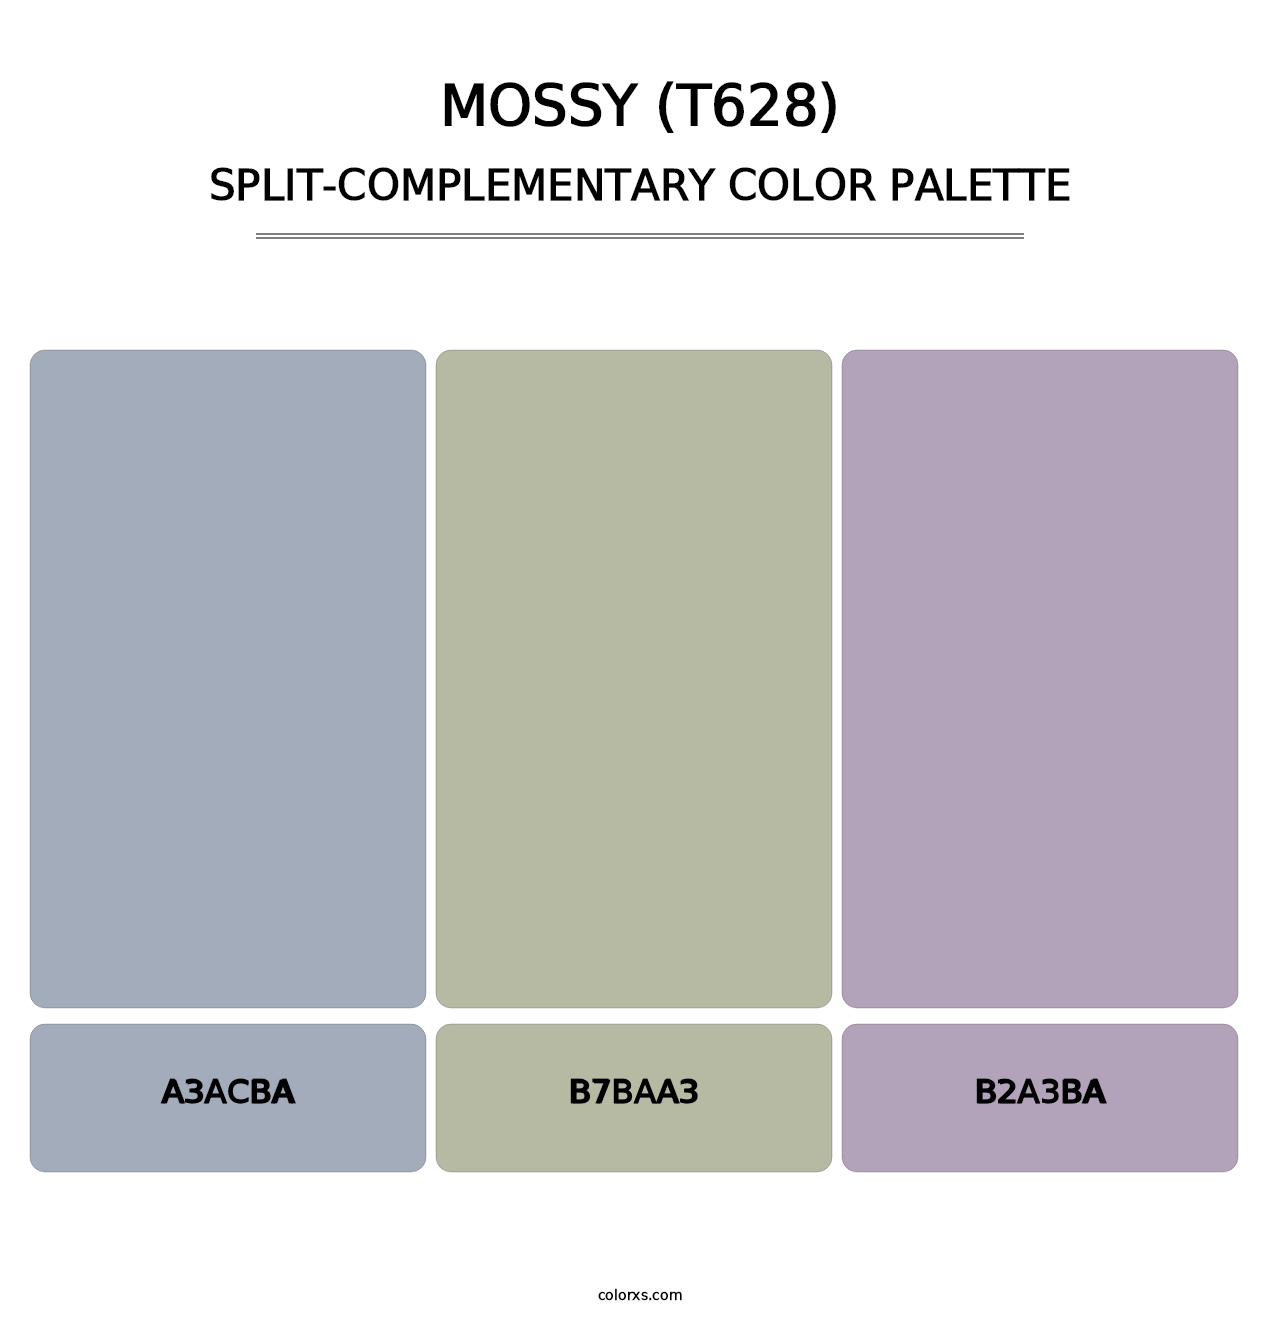 Mossy (T628) - Split-Complementary Color Palette